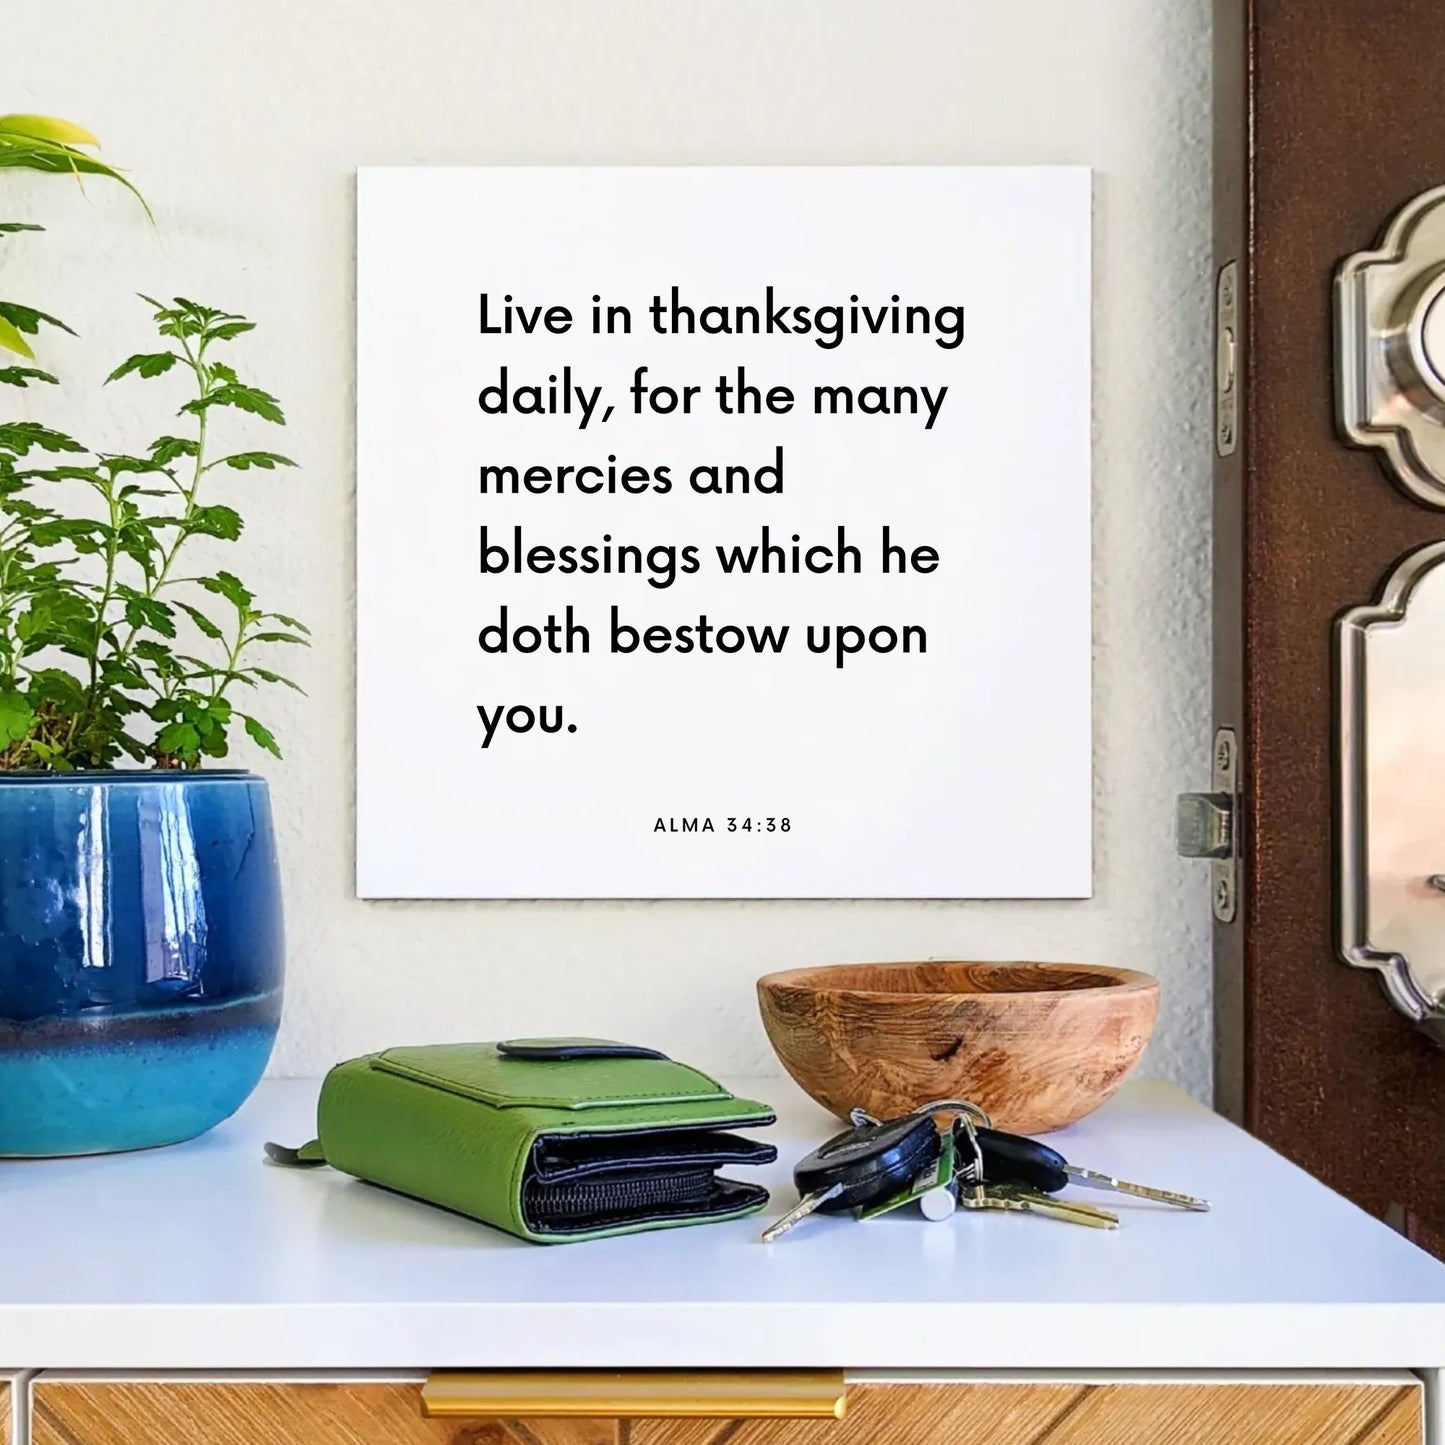 Entryway mouting of the scripture tile for Alma 34:38 - "Live in thanksgiving daily, for the many mercies"